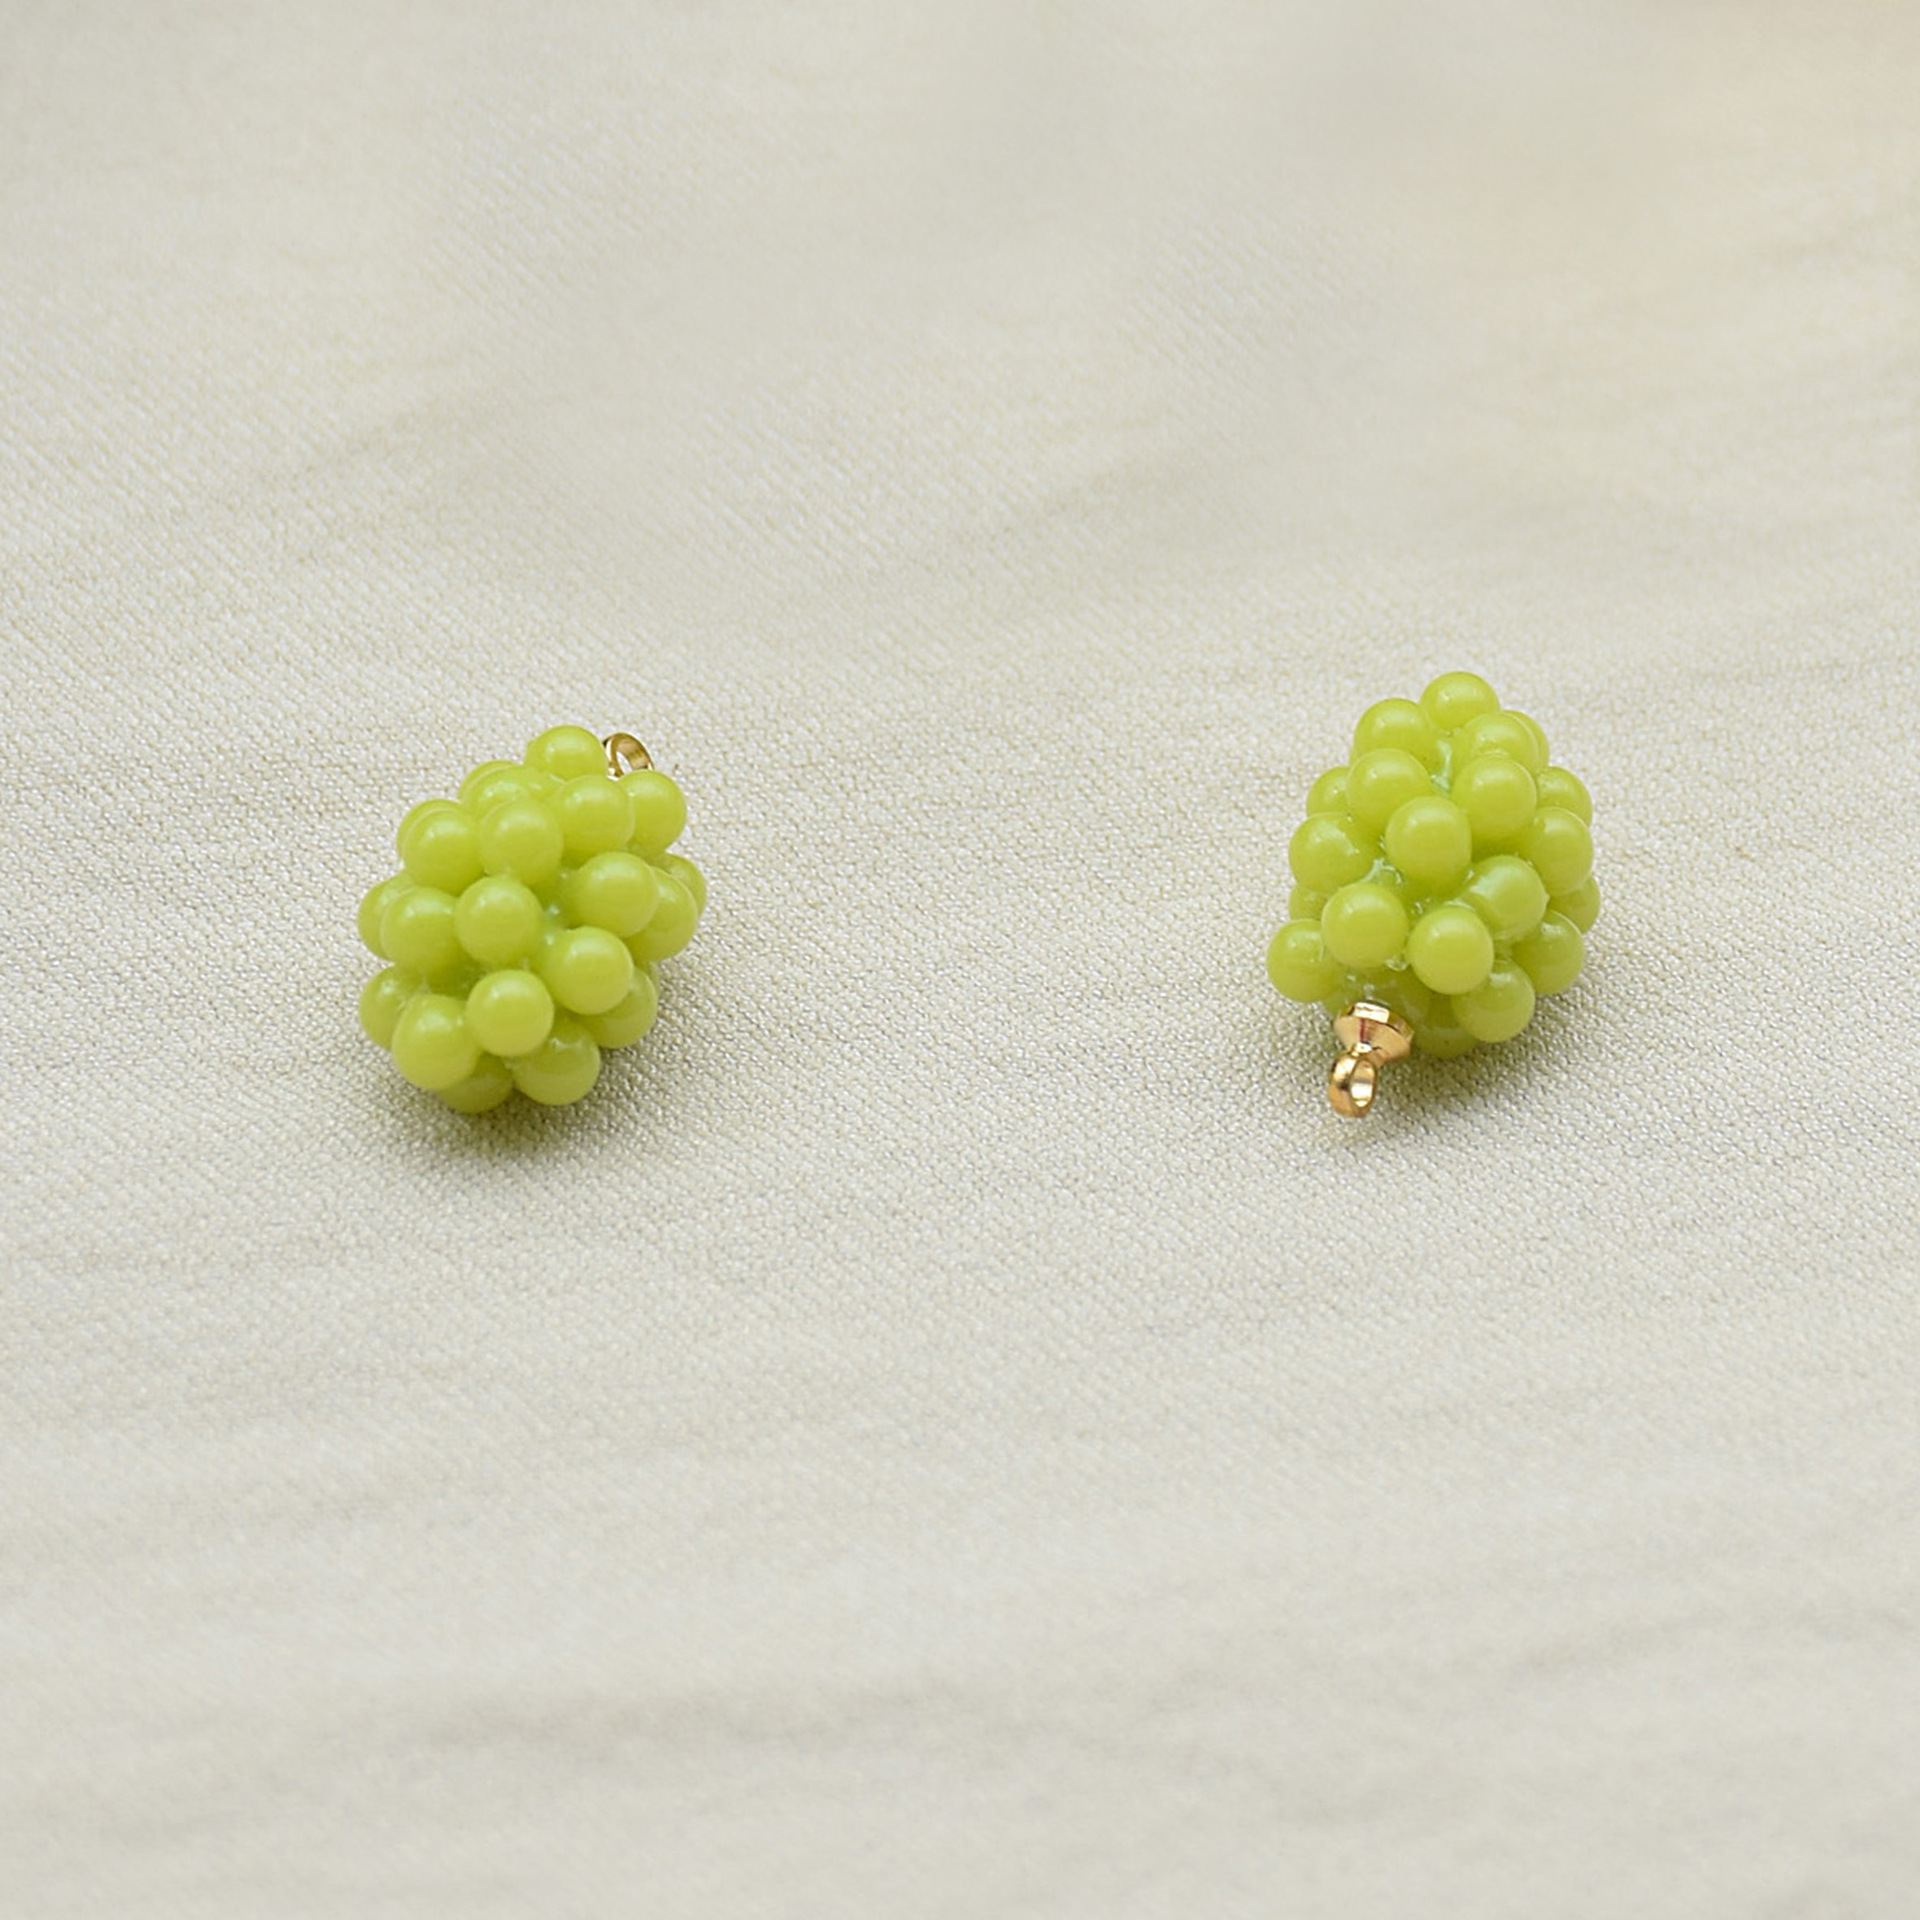 The grapes are yellow and green